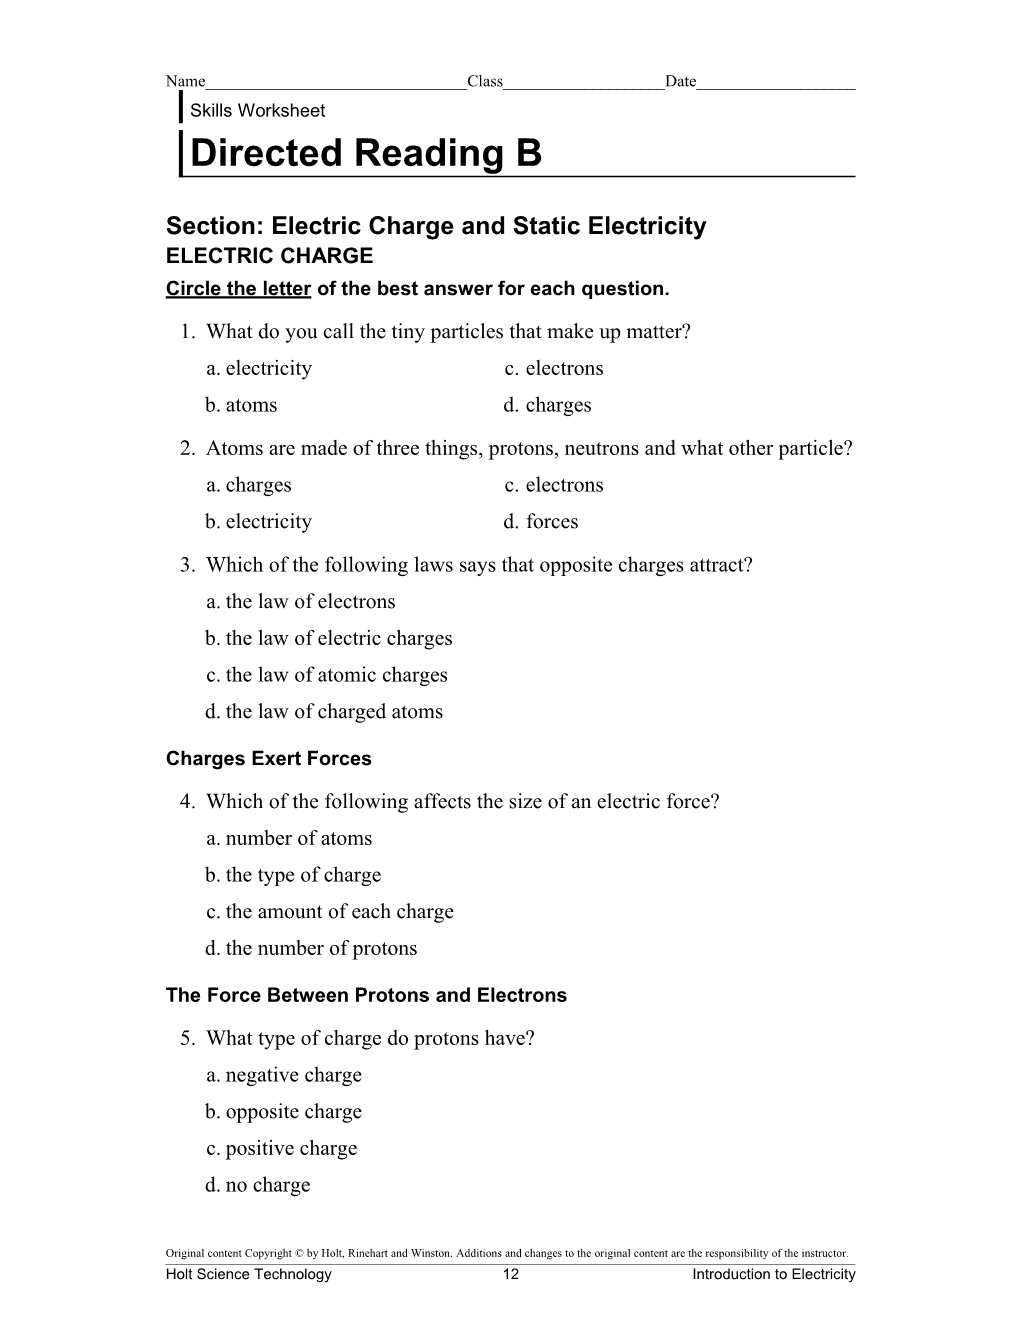 Section: Electric Charge and Static Electricity